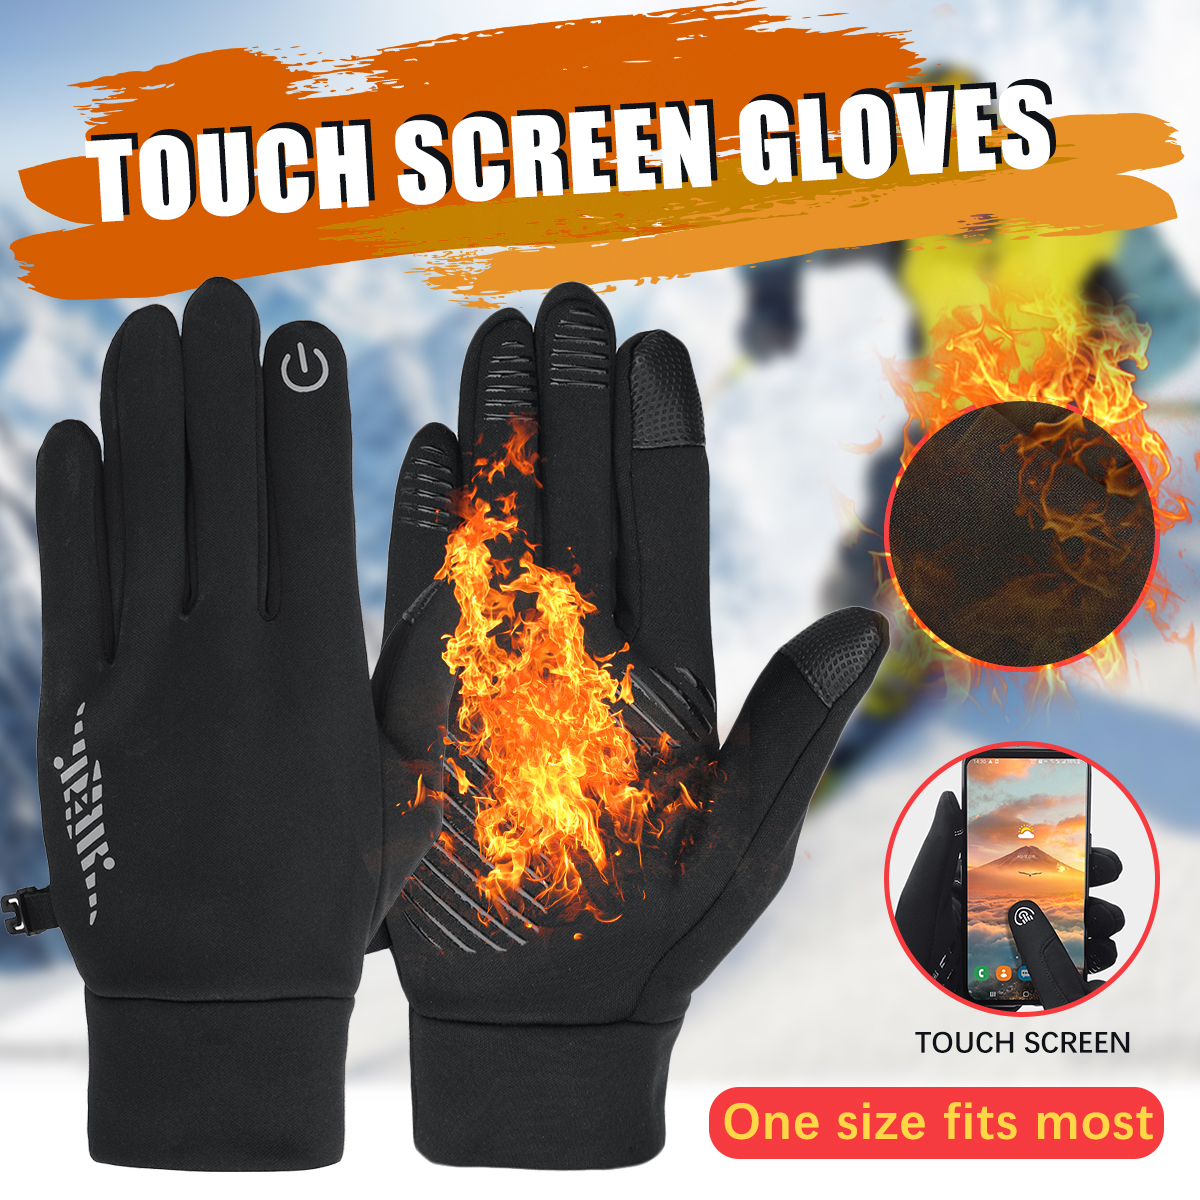 Winter-Warm-Touch-Screen-Thermal-Gloves-Ski-Snow-Snowboard-Cycling-Waterproof-Windproof-Gloves-1923176-1